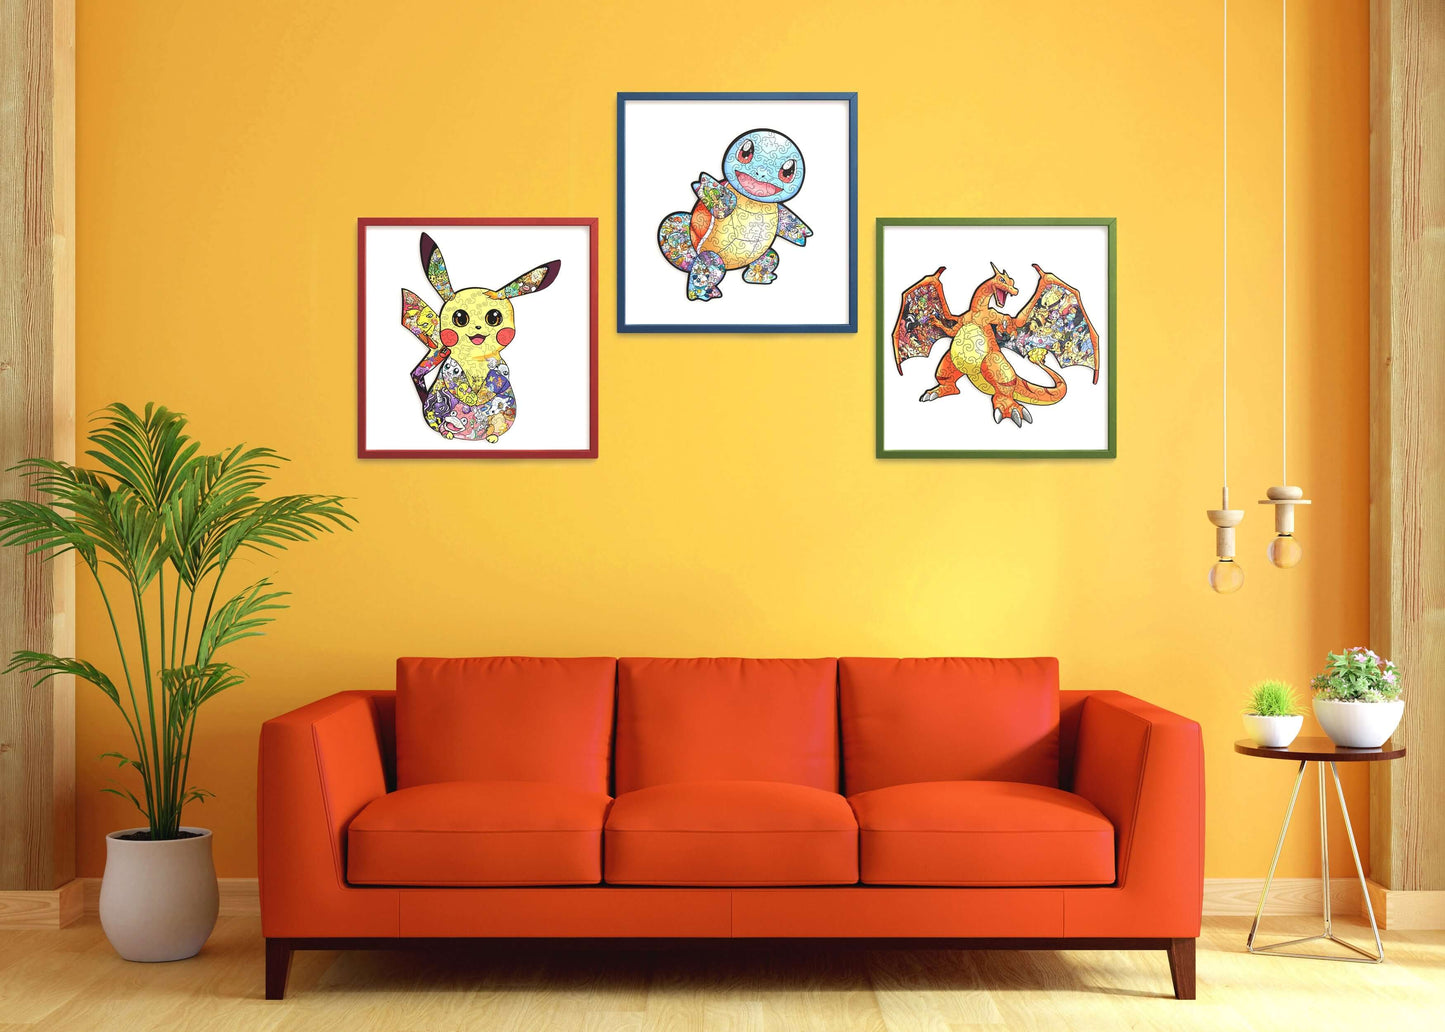 Pikachu, Squirtle & Charizard Wooden Puzzles Pack Active Puzzles